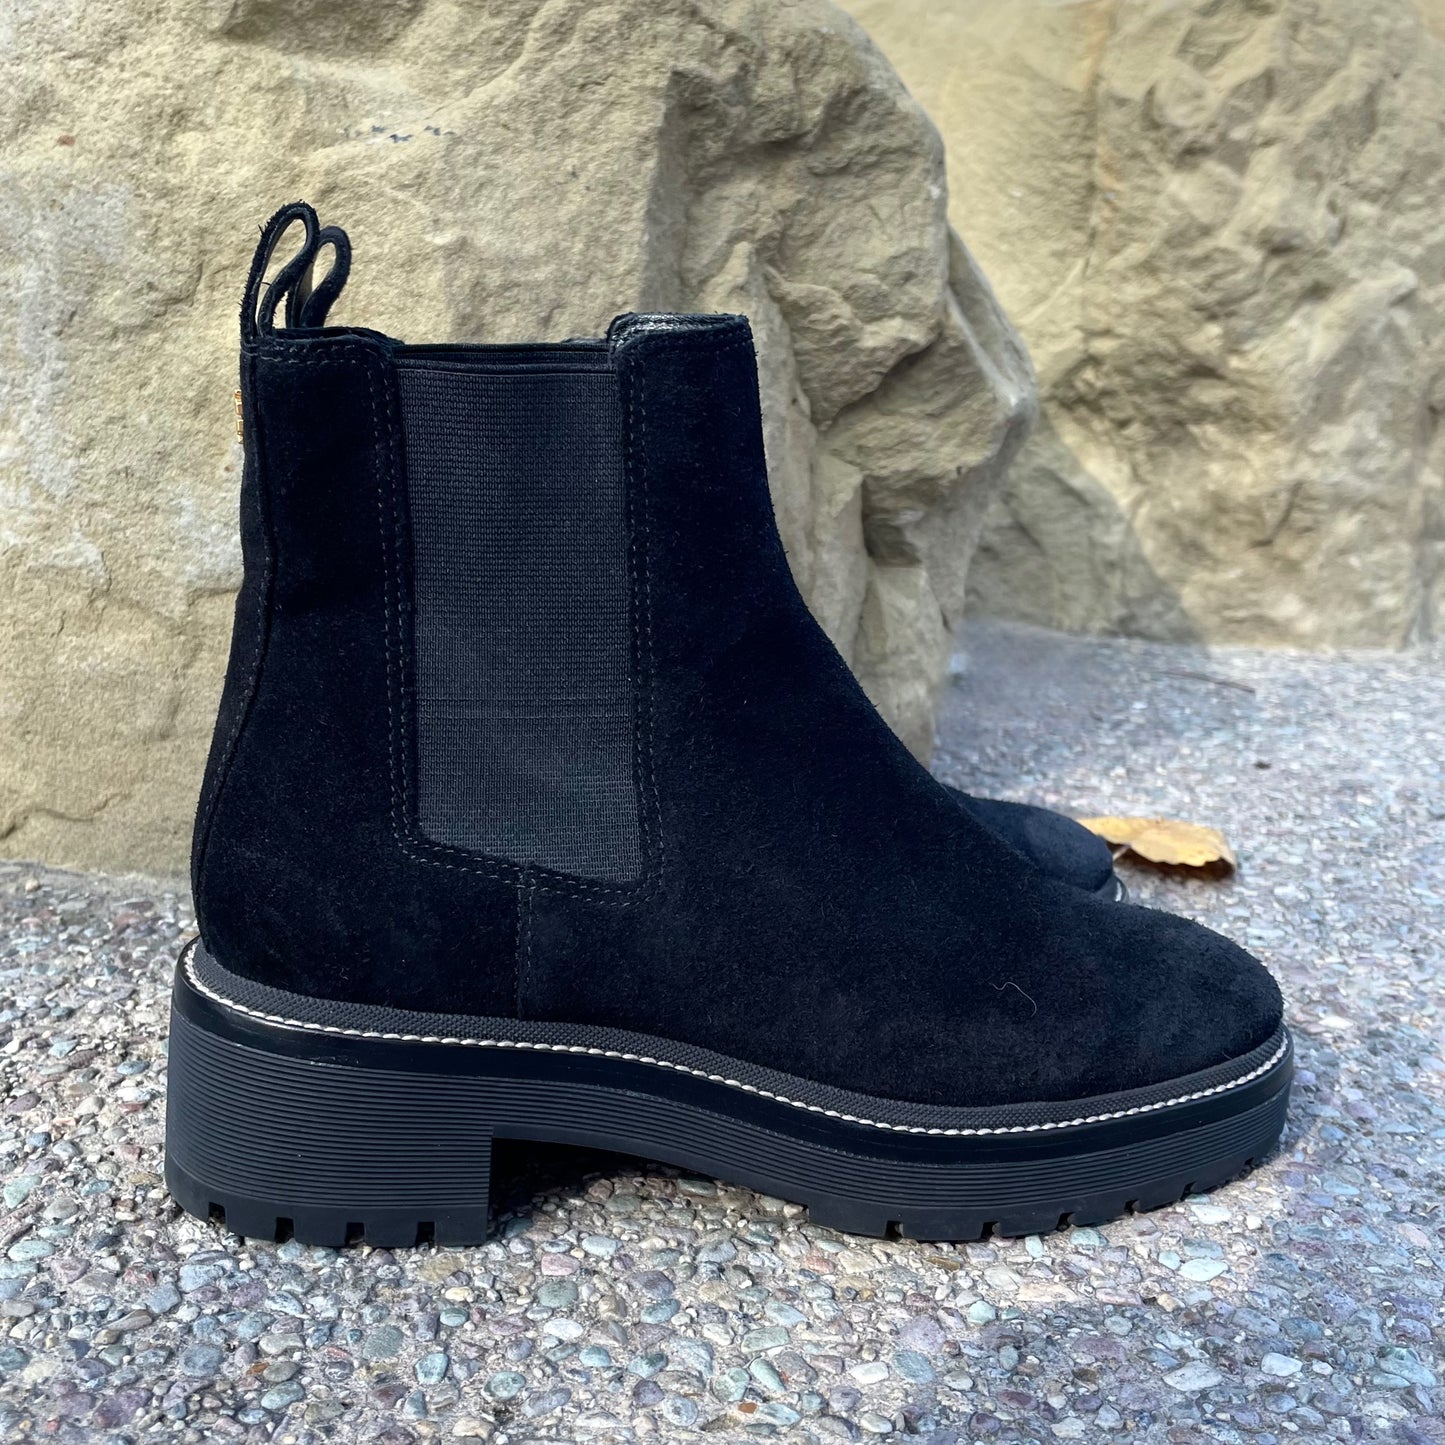 Tory Burch Chelsea Boots